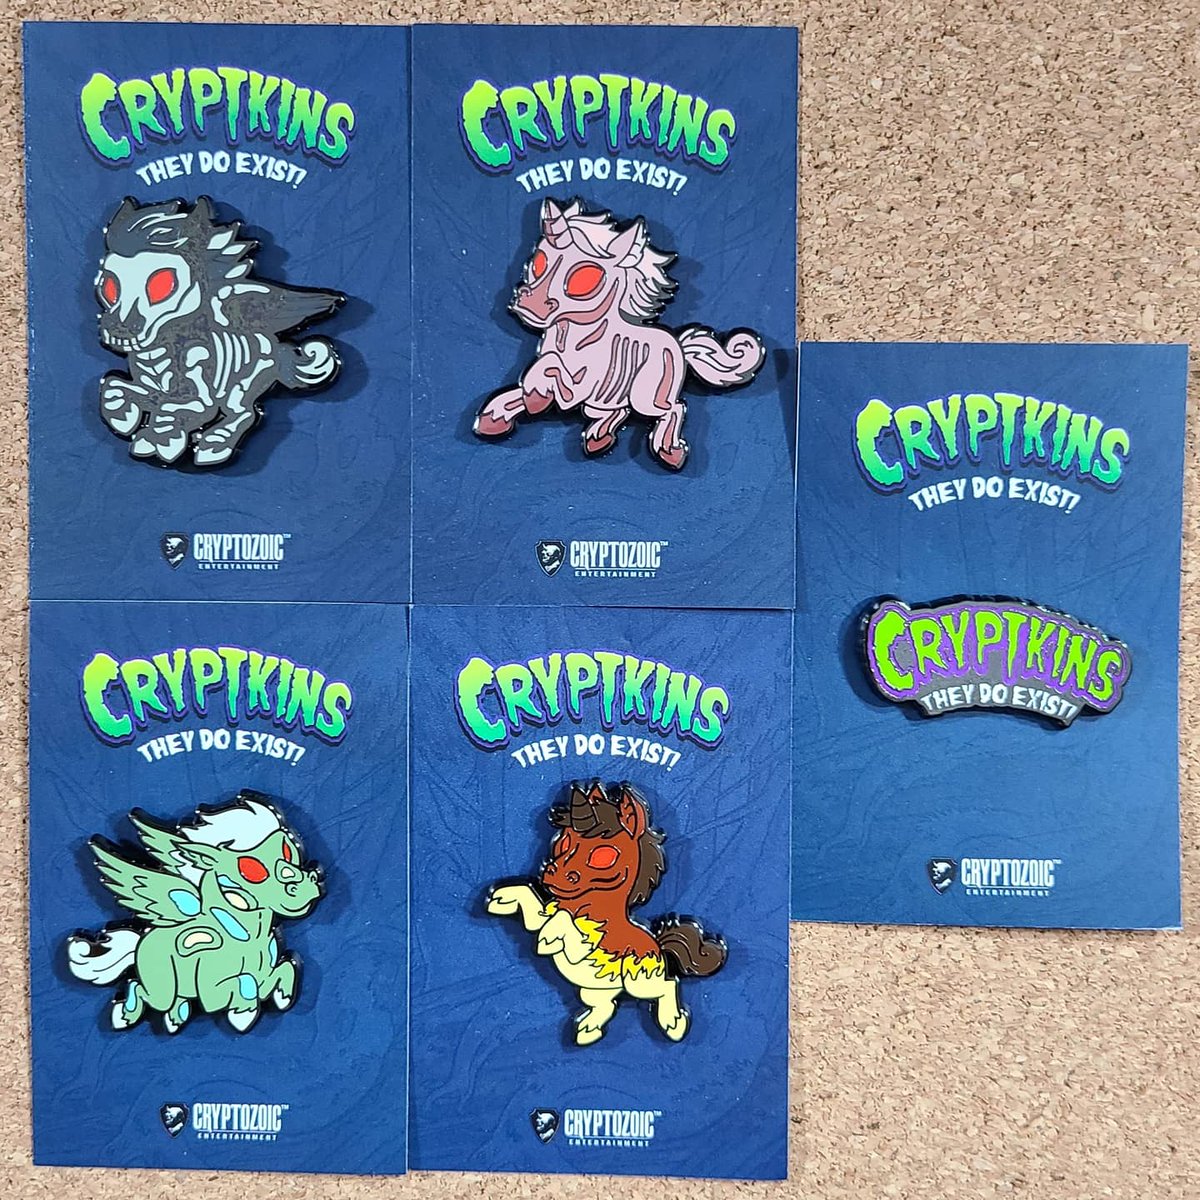 LESS THAN 3 HOURS LEFT TO ENTER!

#giveaway #cryptkins #theydoexist @Cryptkins @Cryptozoic

gleam.io/srcFZ/cryptkin…